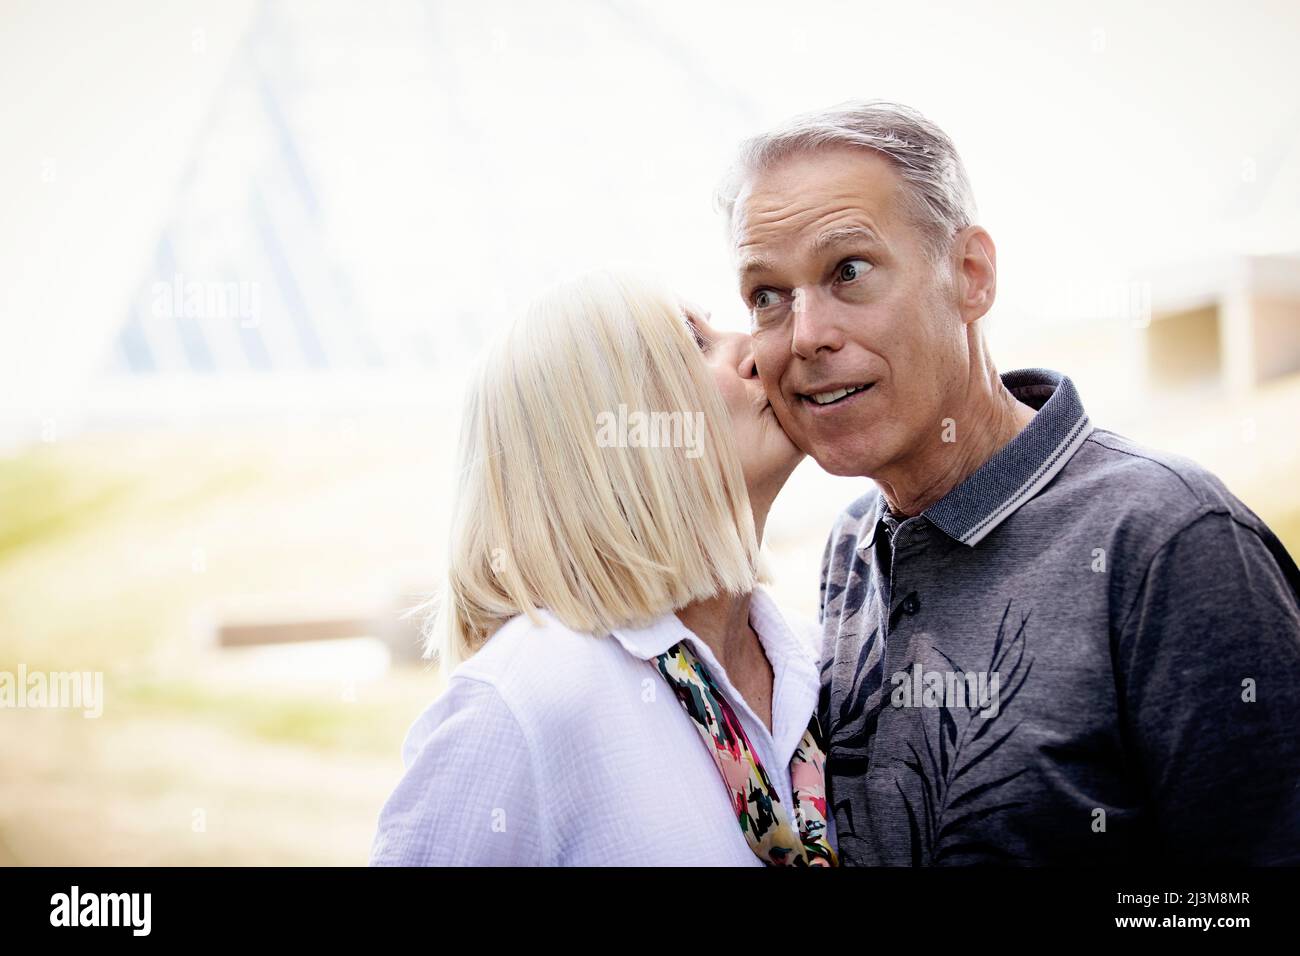 Wife kissing her husband's cheek as he has a look of surprise on his face; Edmonton, Alberta, Canada Stock Photo